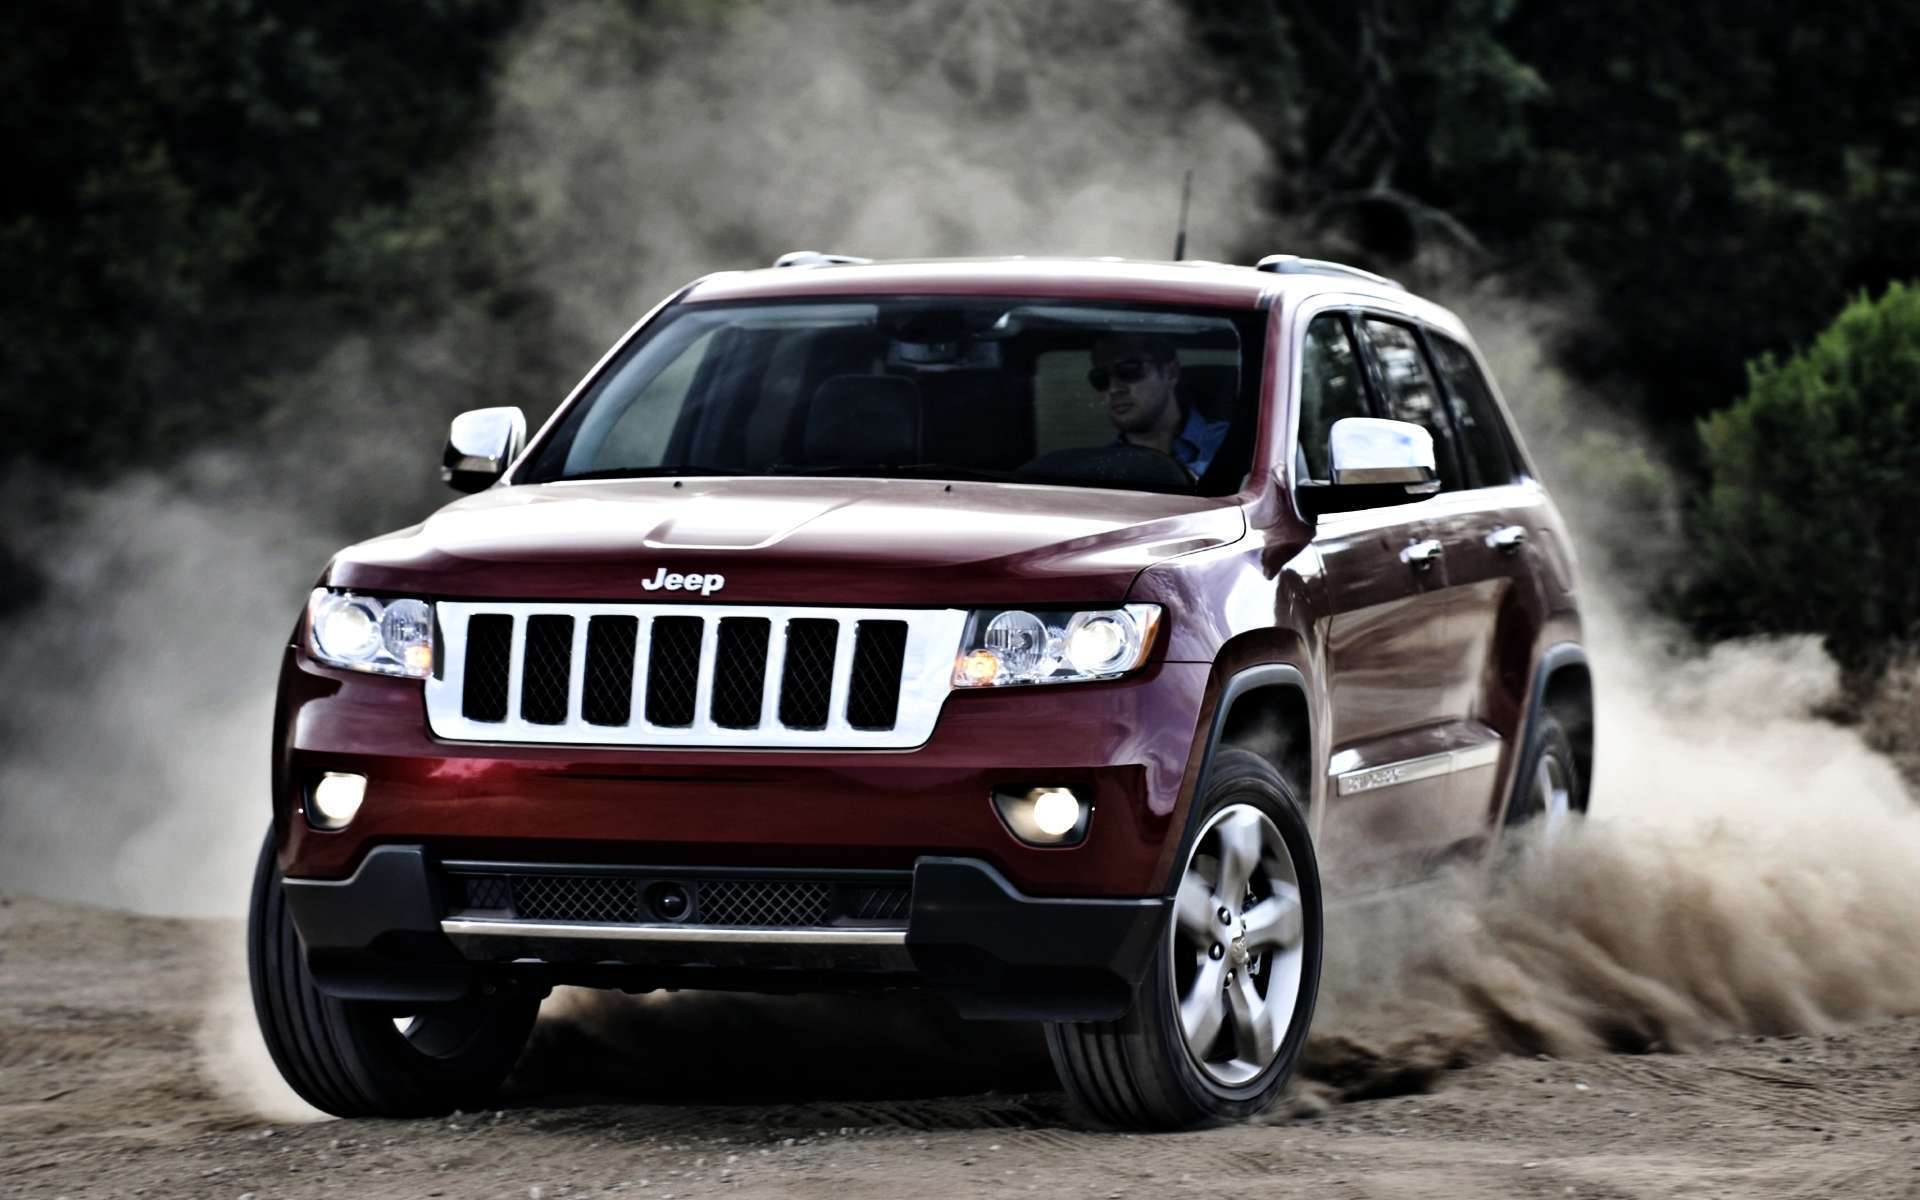 Click here to download in HD Format >> Jeep Grand Cherokee HD Hd